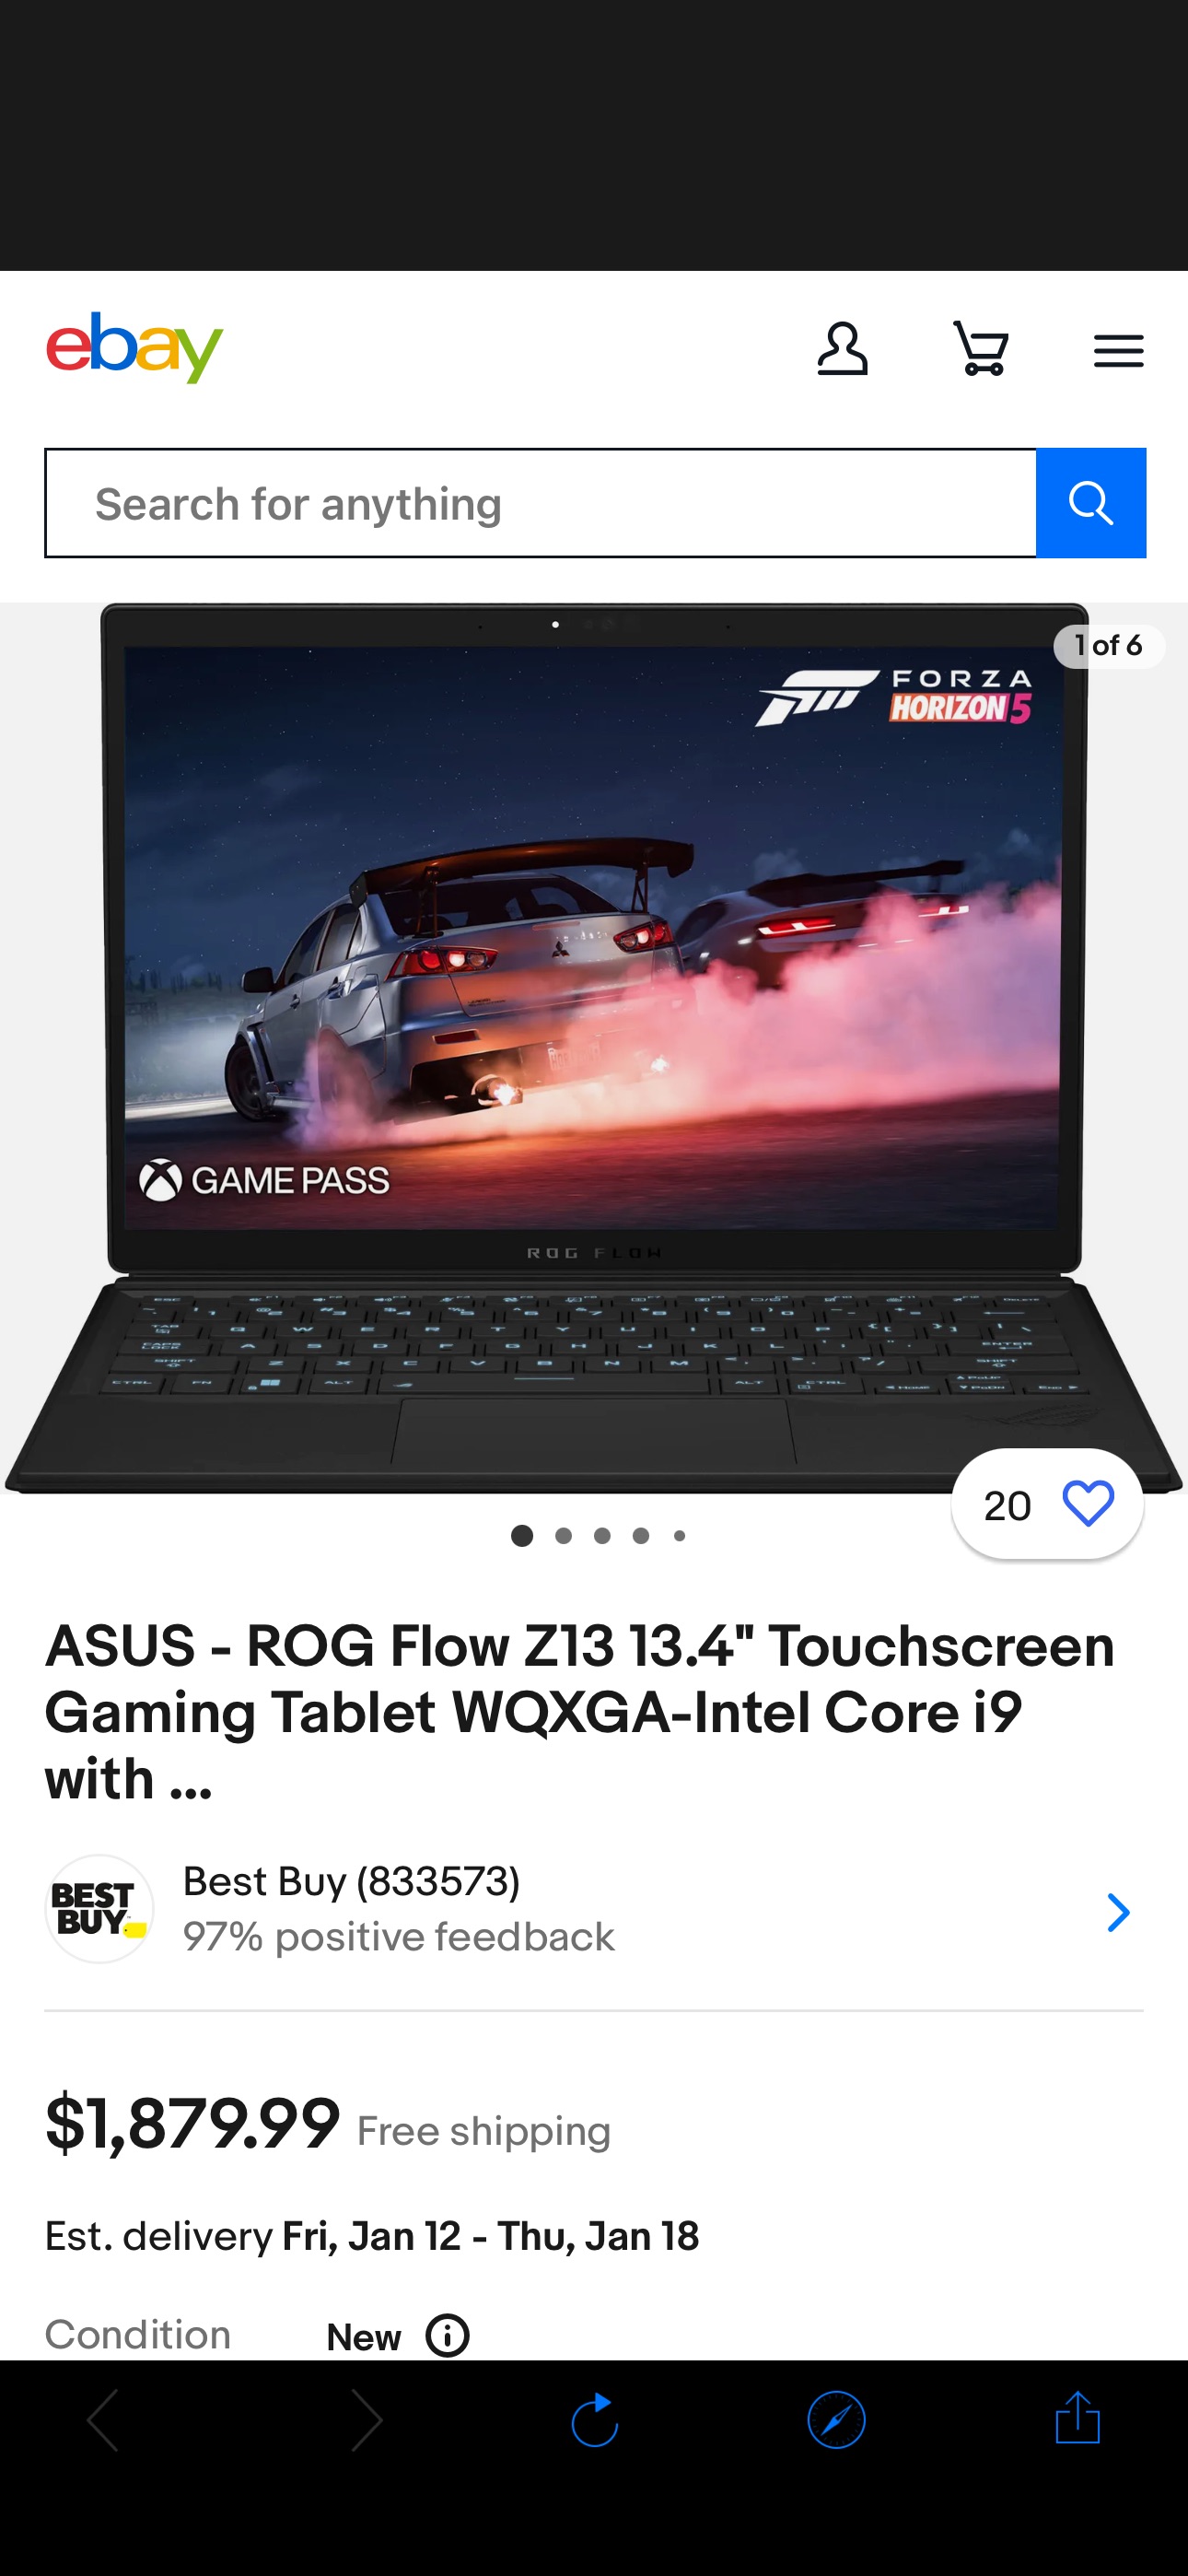 ASUS - ROG Flow Z13 13.4" Touchscreen Gaming Tablet WQXGA-Intel Core i9 with ... | eBay